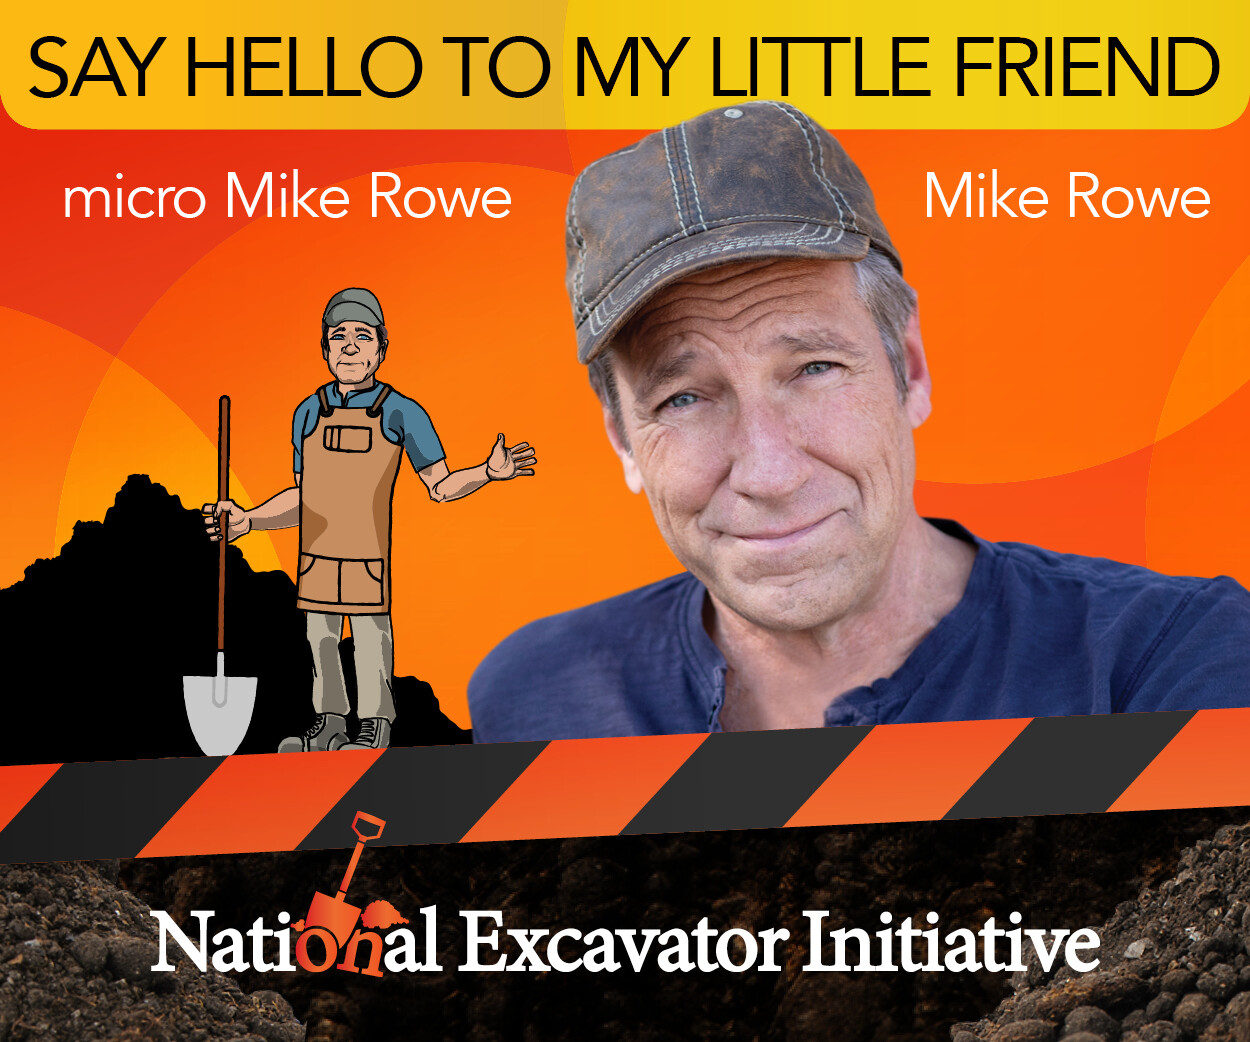 Mike Rowe gets dirty while digging ad